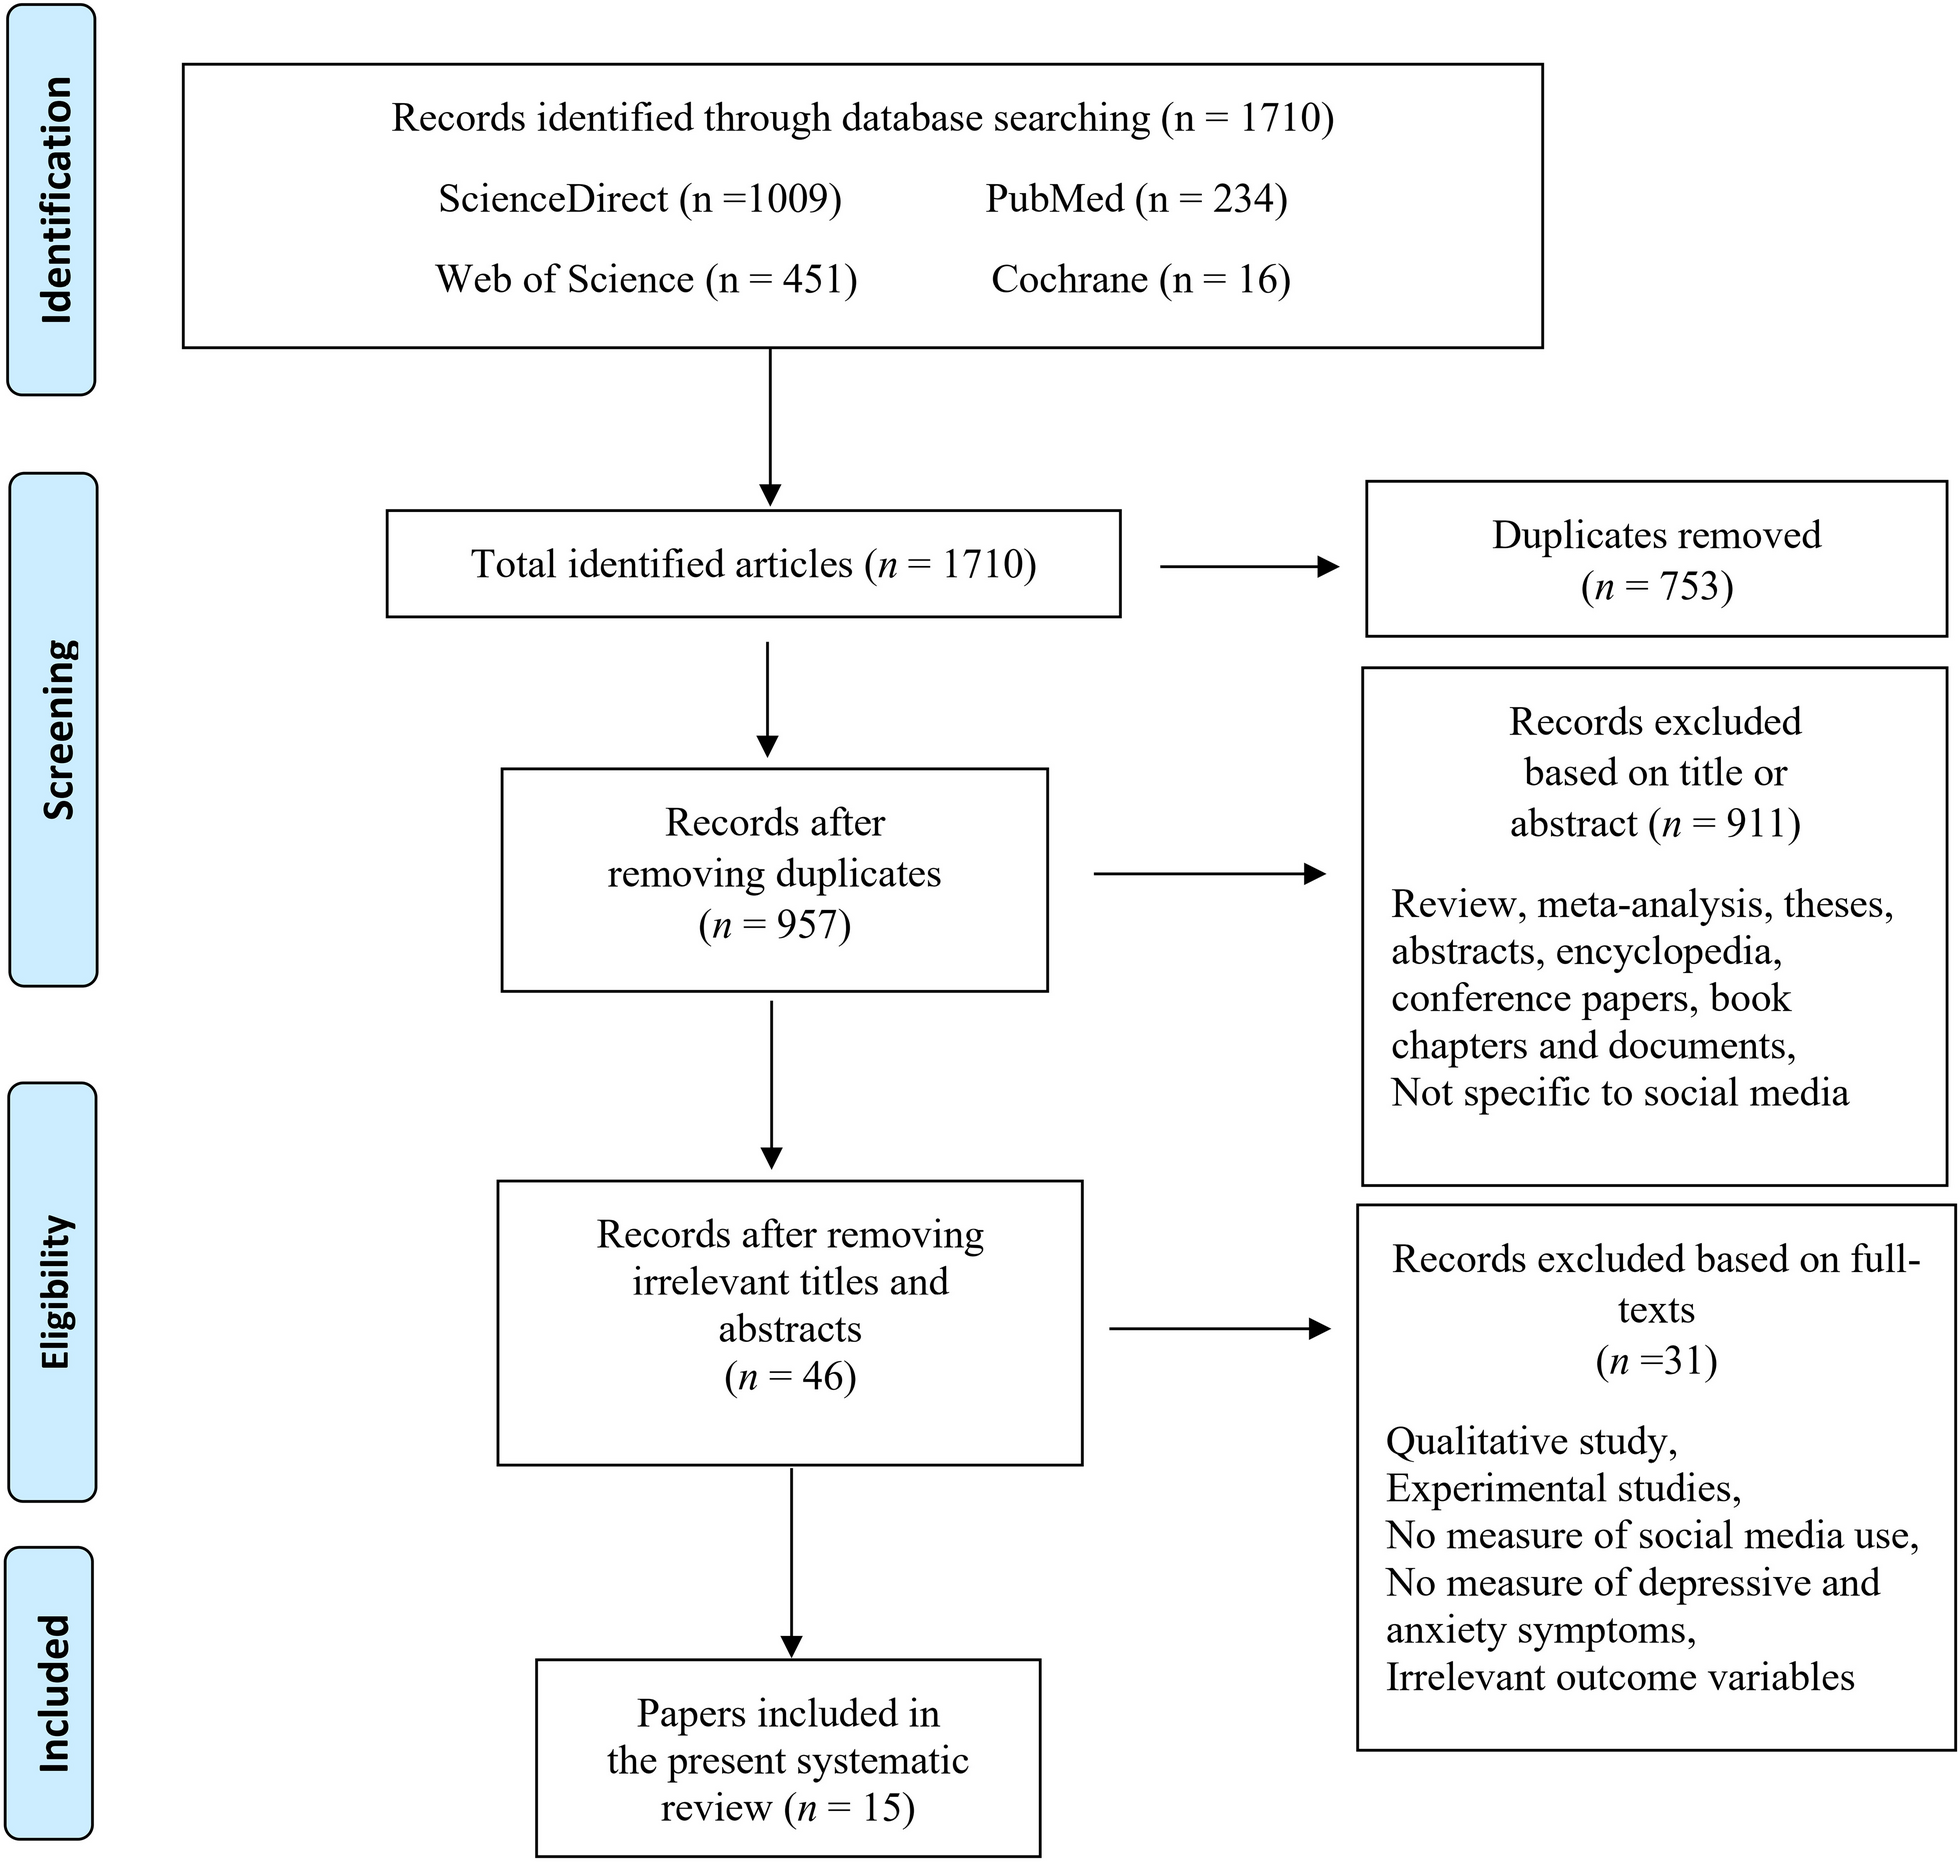 Depression and anxiety and its association with problematic social media use in the MENA region: a systematic review